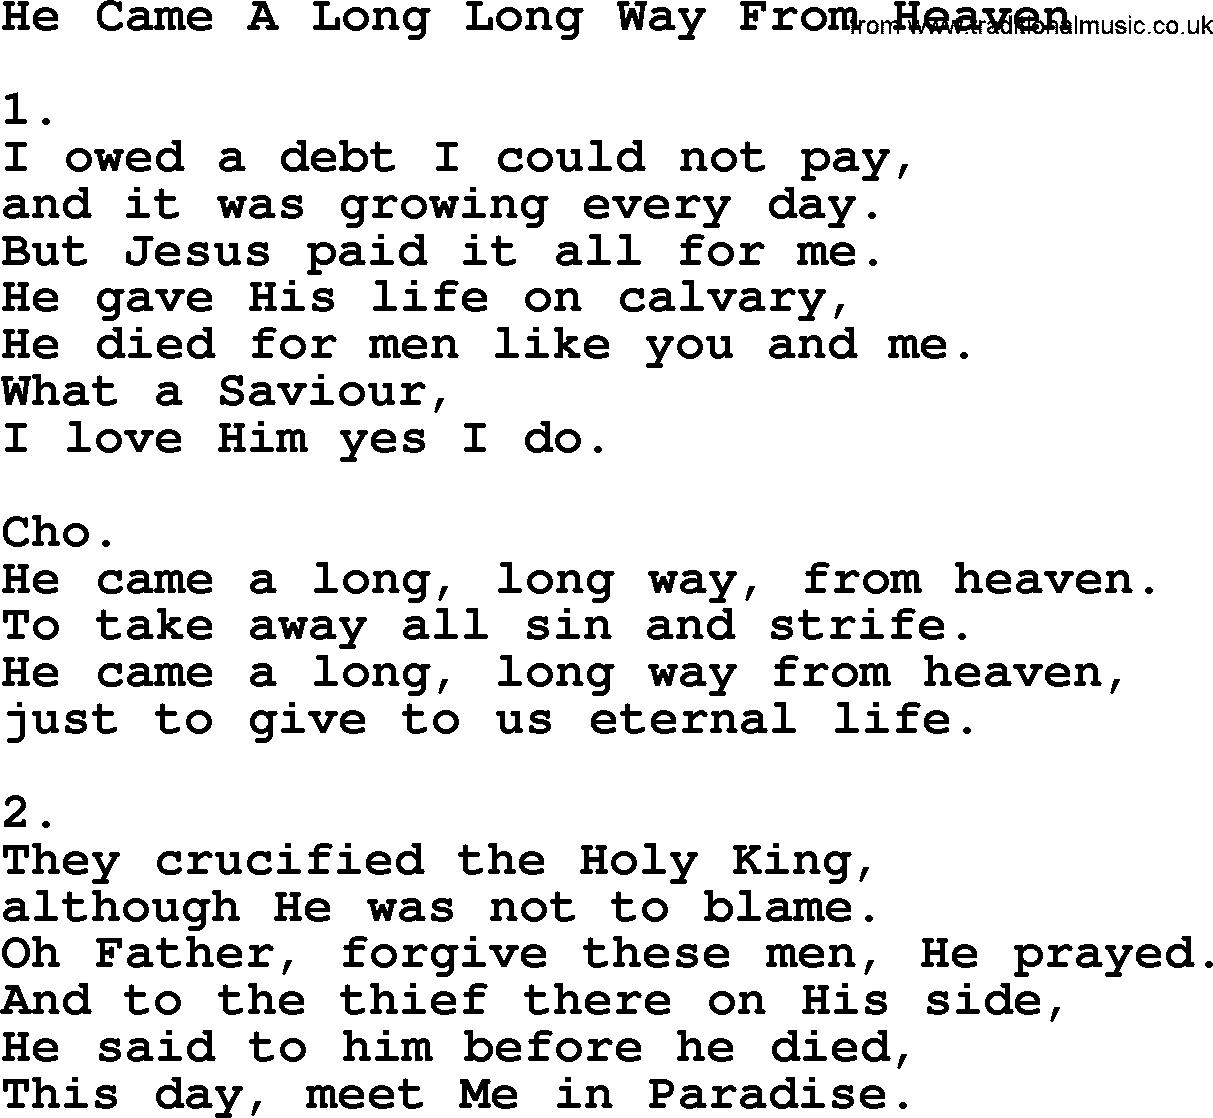 Apostolic & Pentecostal Hymns and Songs, Hymn: He Came A Long Long Way From Heaven lyrics and PDF